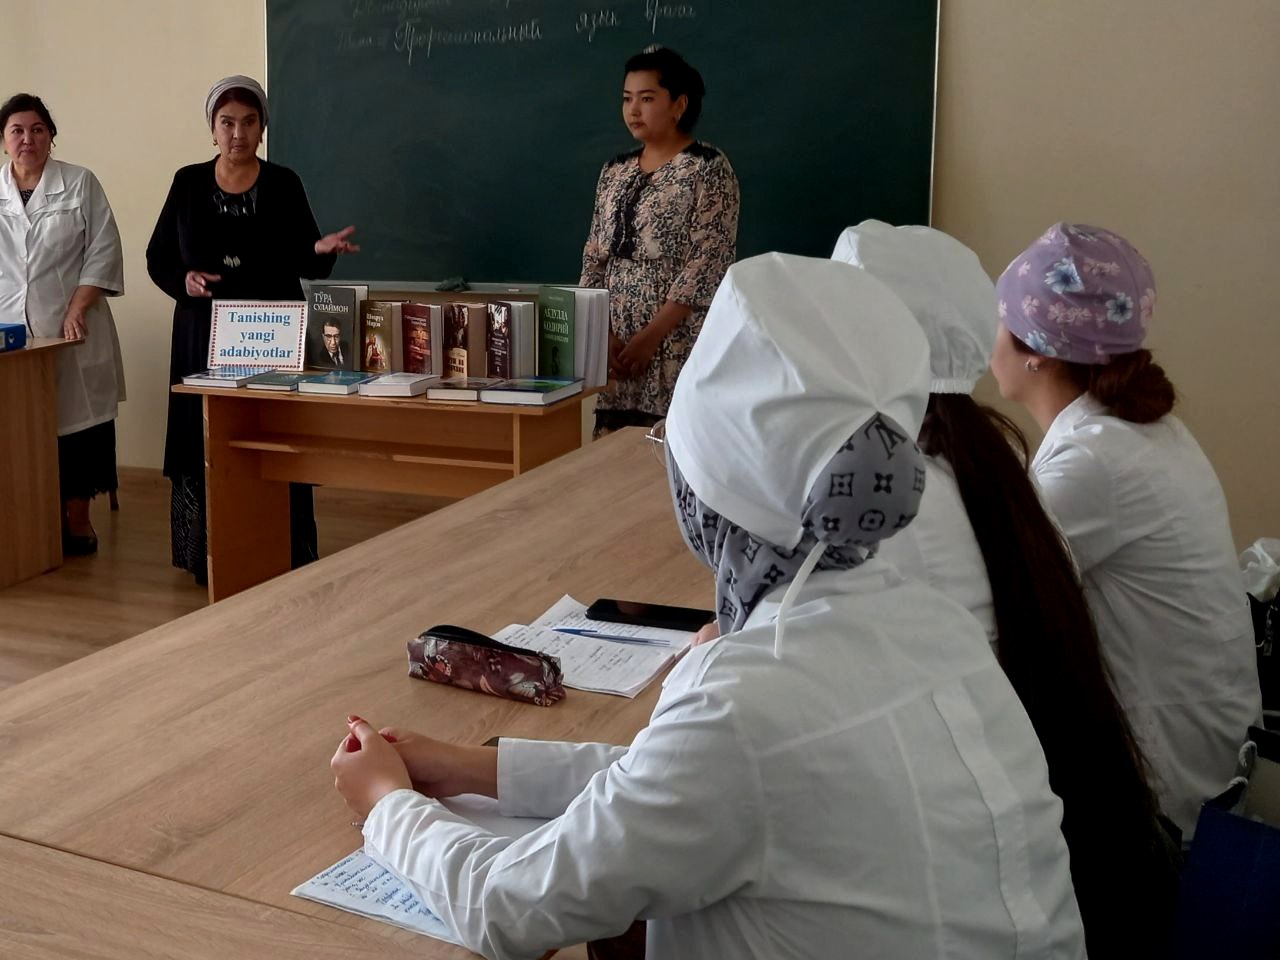 BOOK PRESENTATION FOR THE DEPARTMENTS OF SOCIAL HUMANITIES AND UZBEK LANGUAGE AND LITERATURE, LANGUAGES